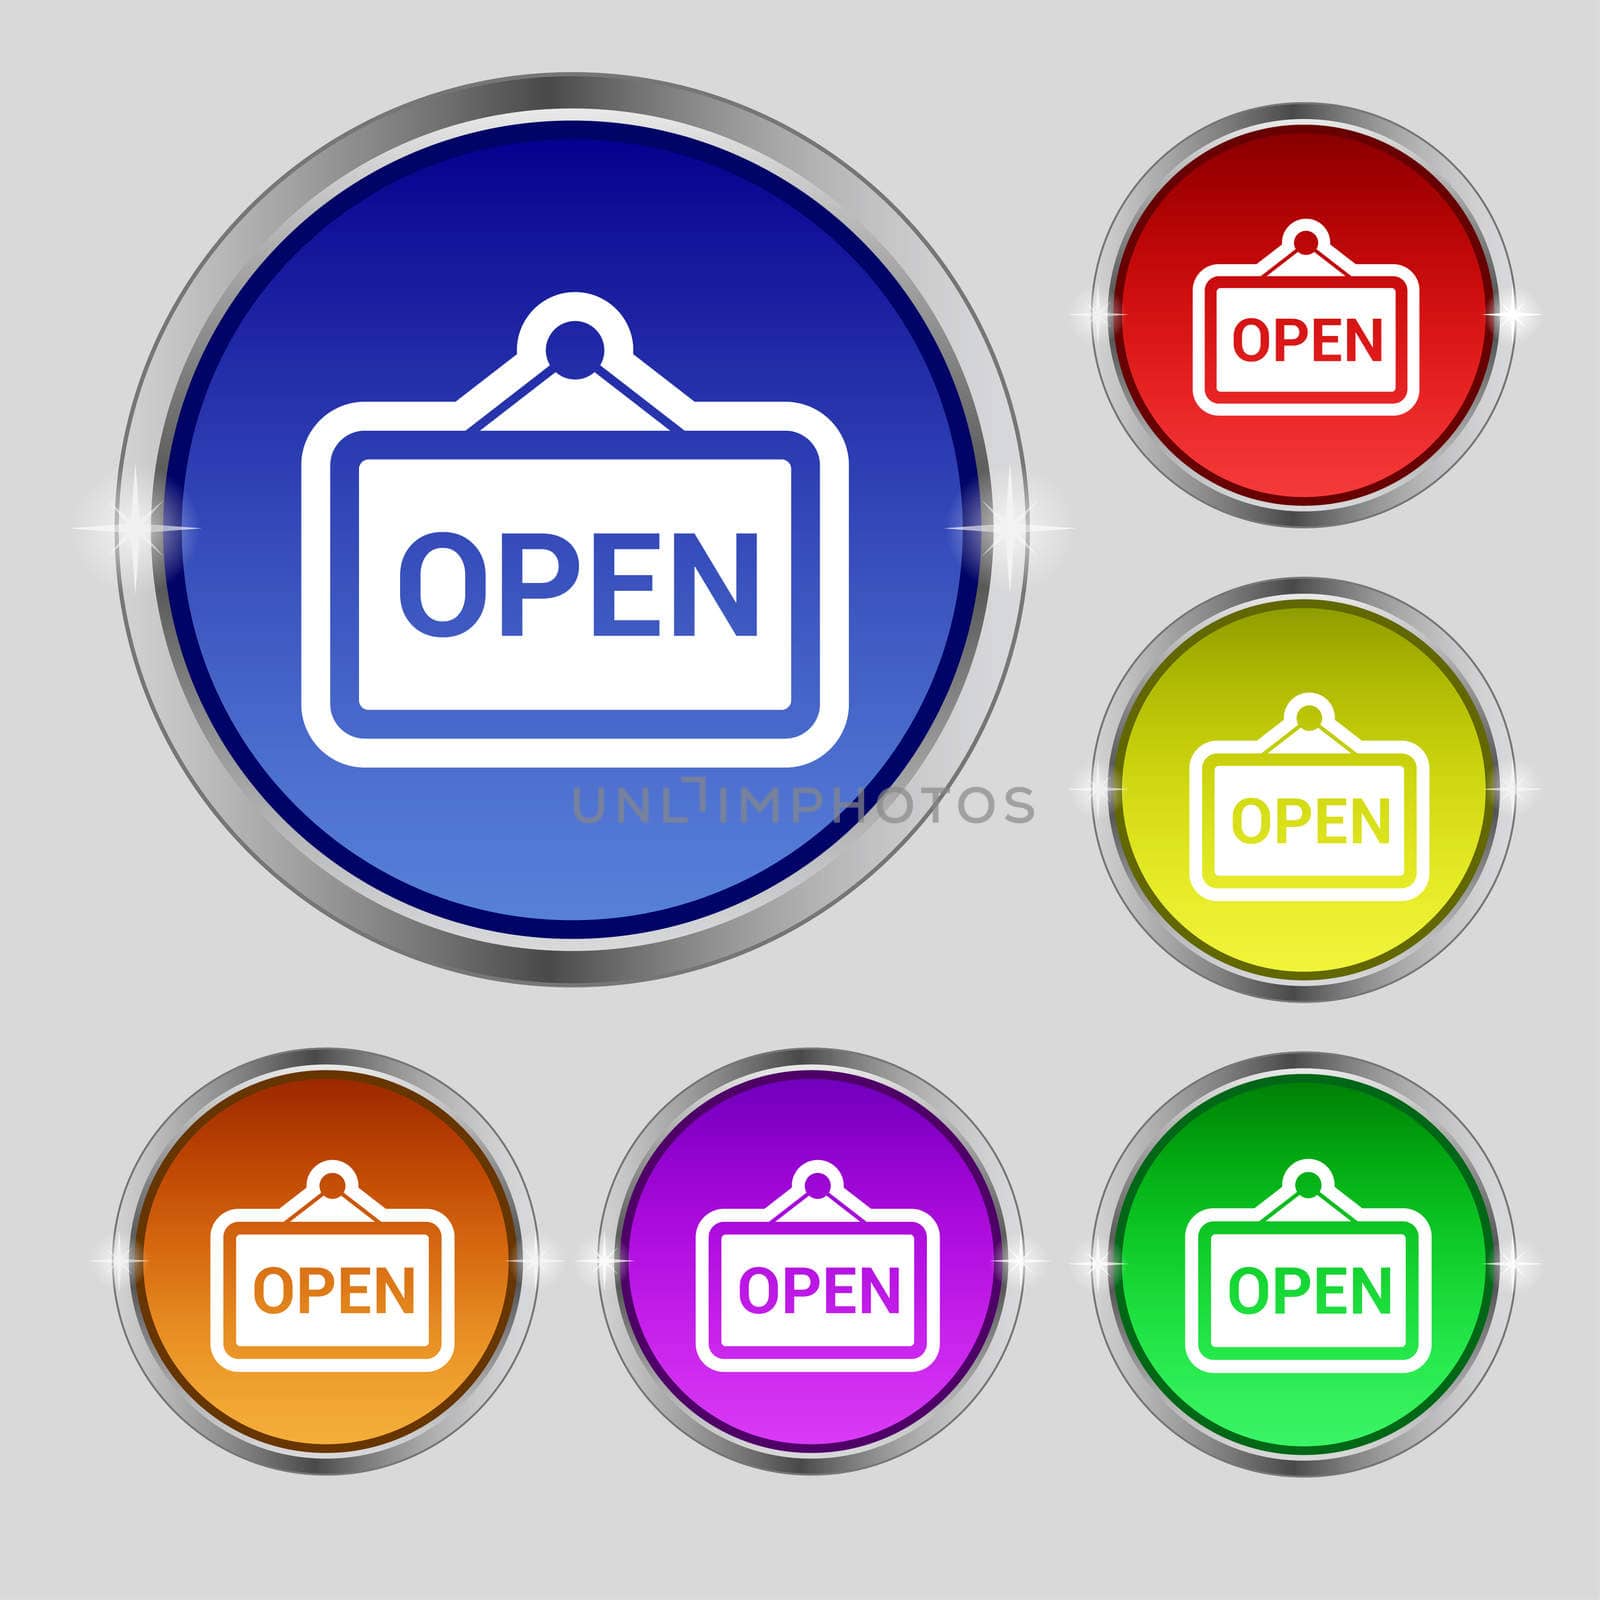 open icon sign. Round symbol on bright colourful buttons. illustration